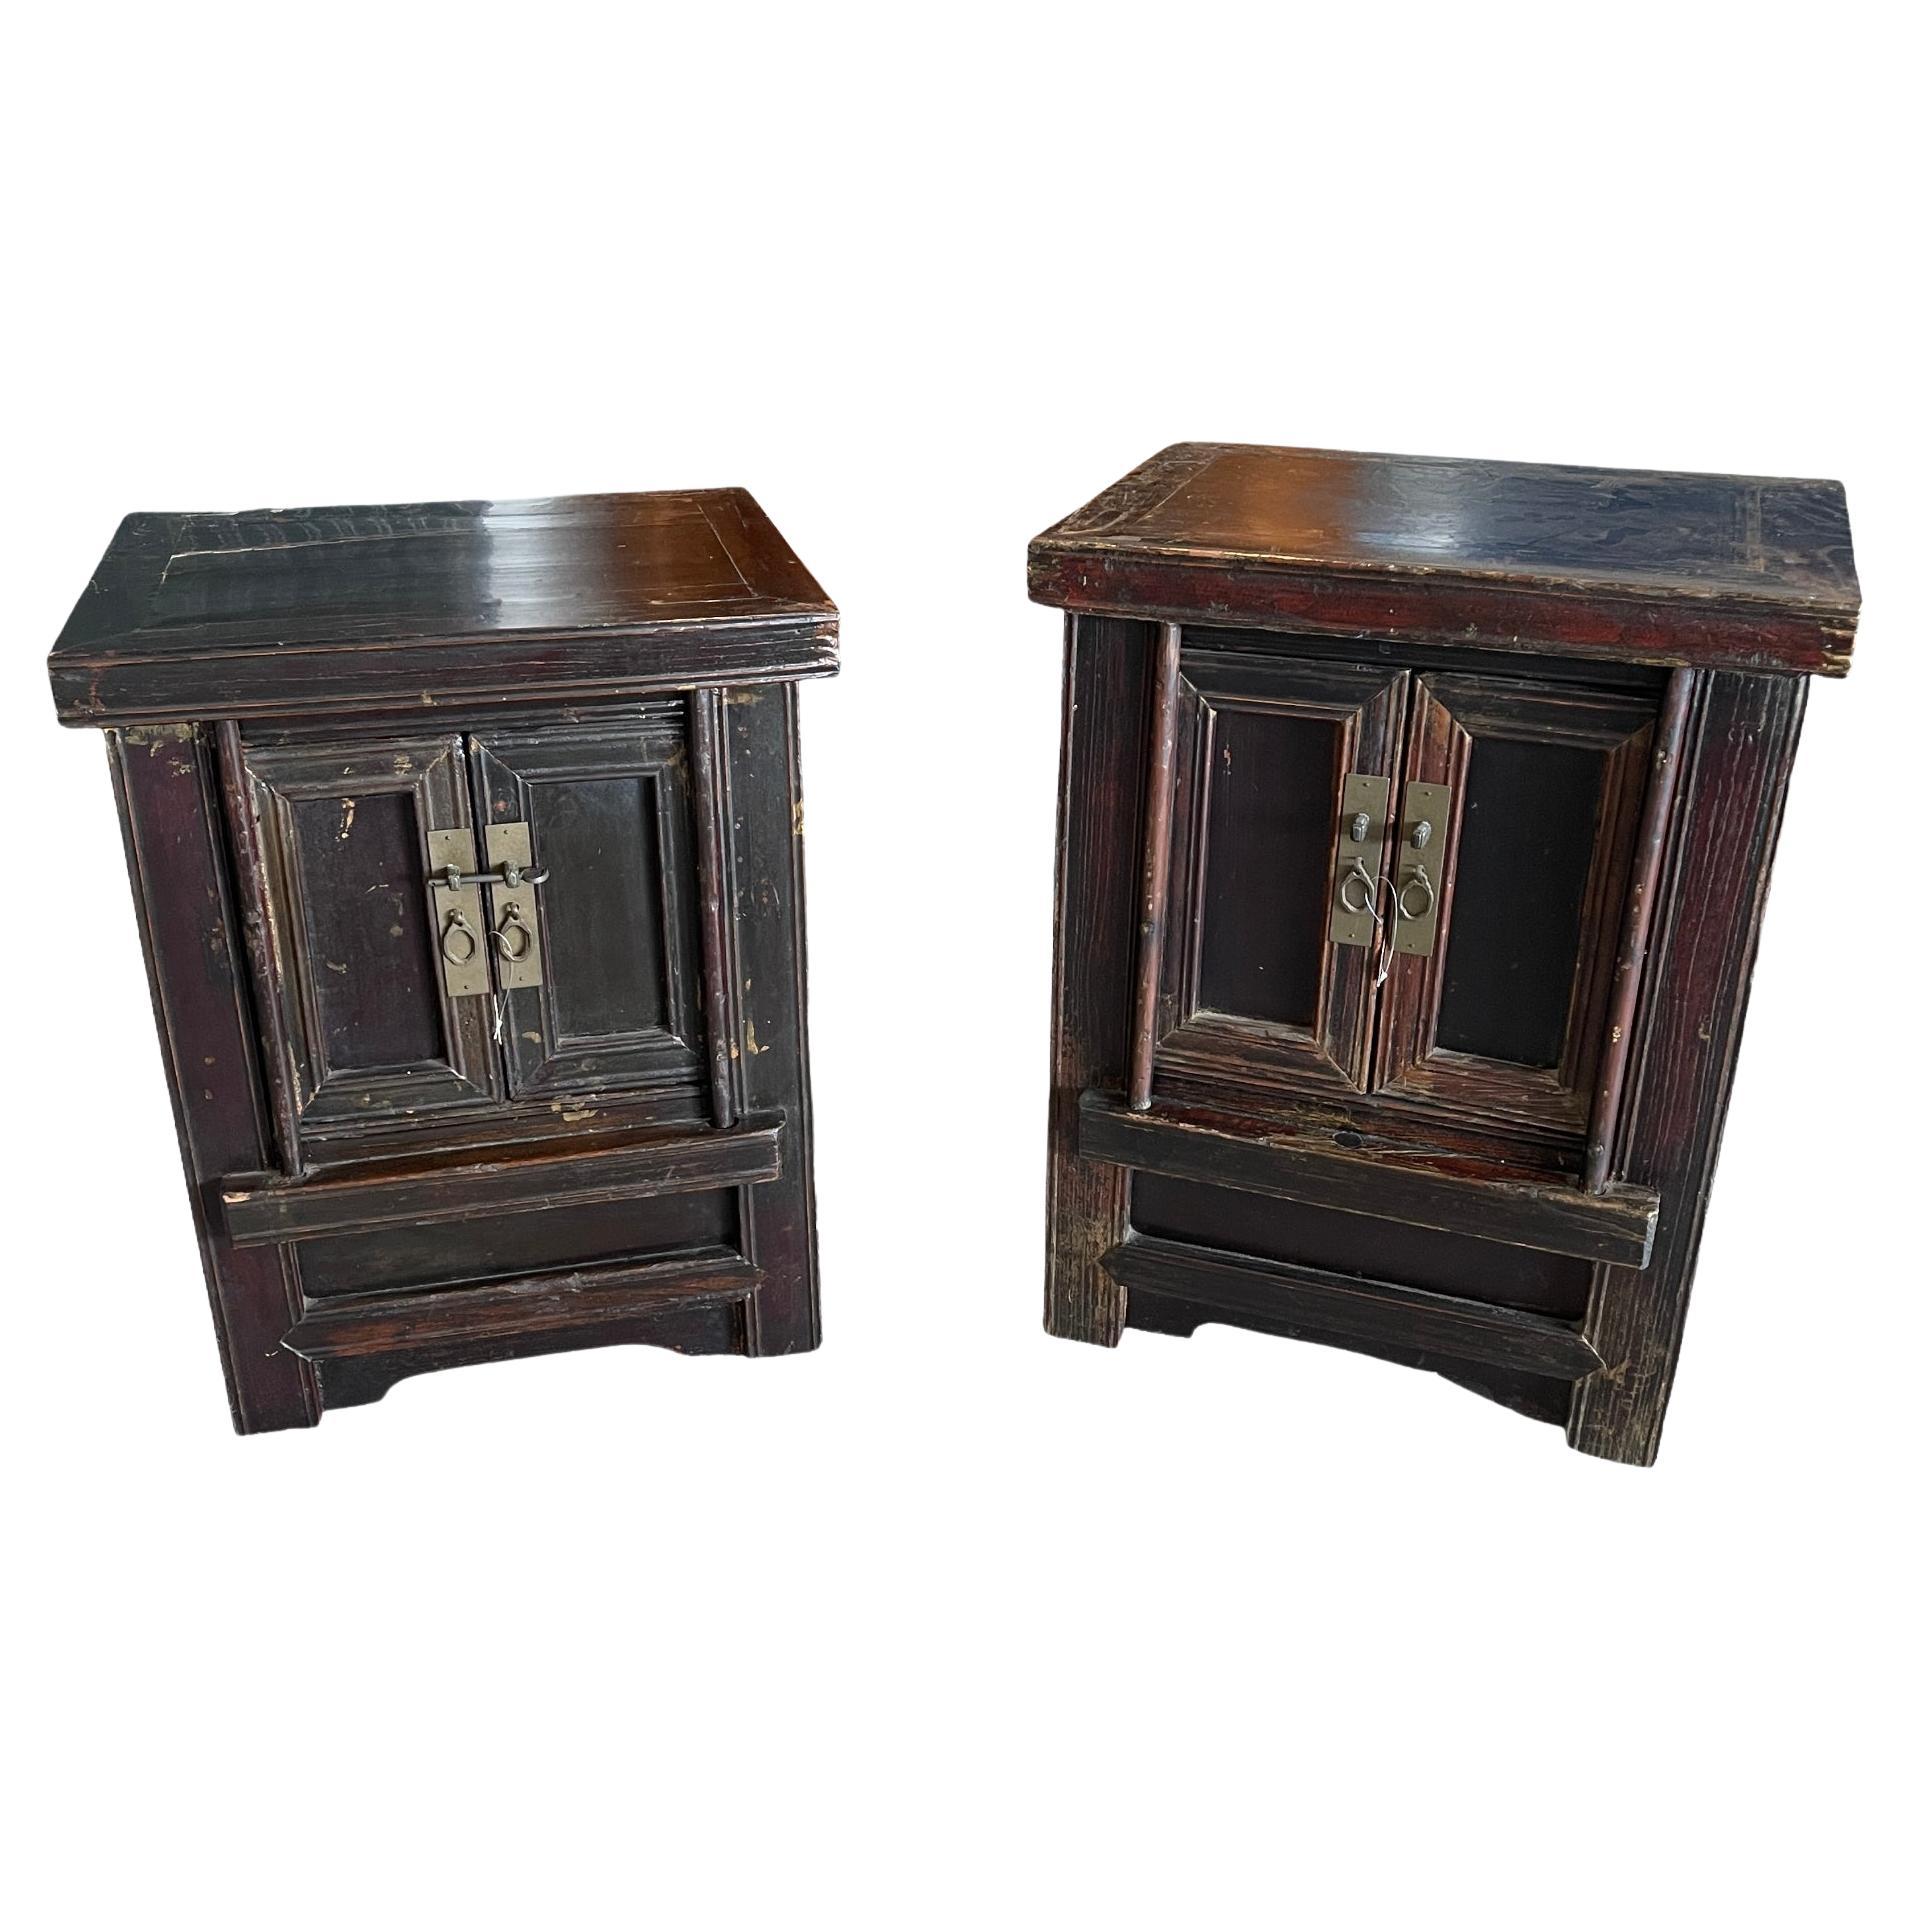 A pair of Chinese Qing Dynasty period bedside cabinets from the 19th century For Sale